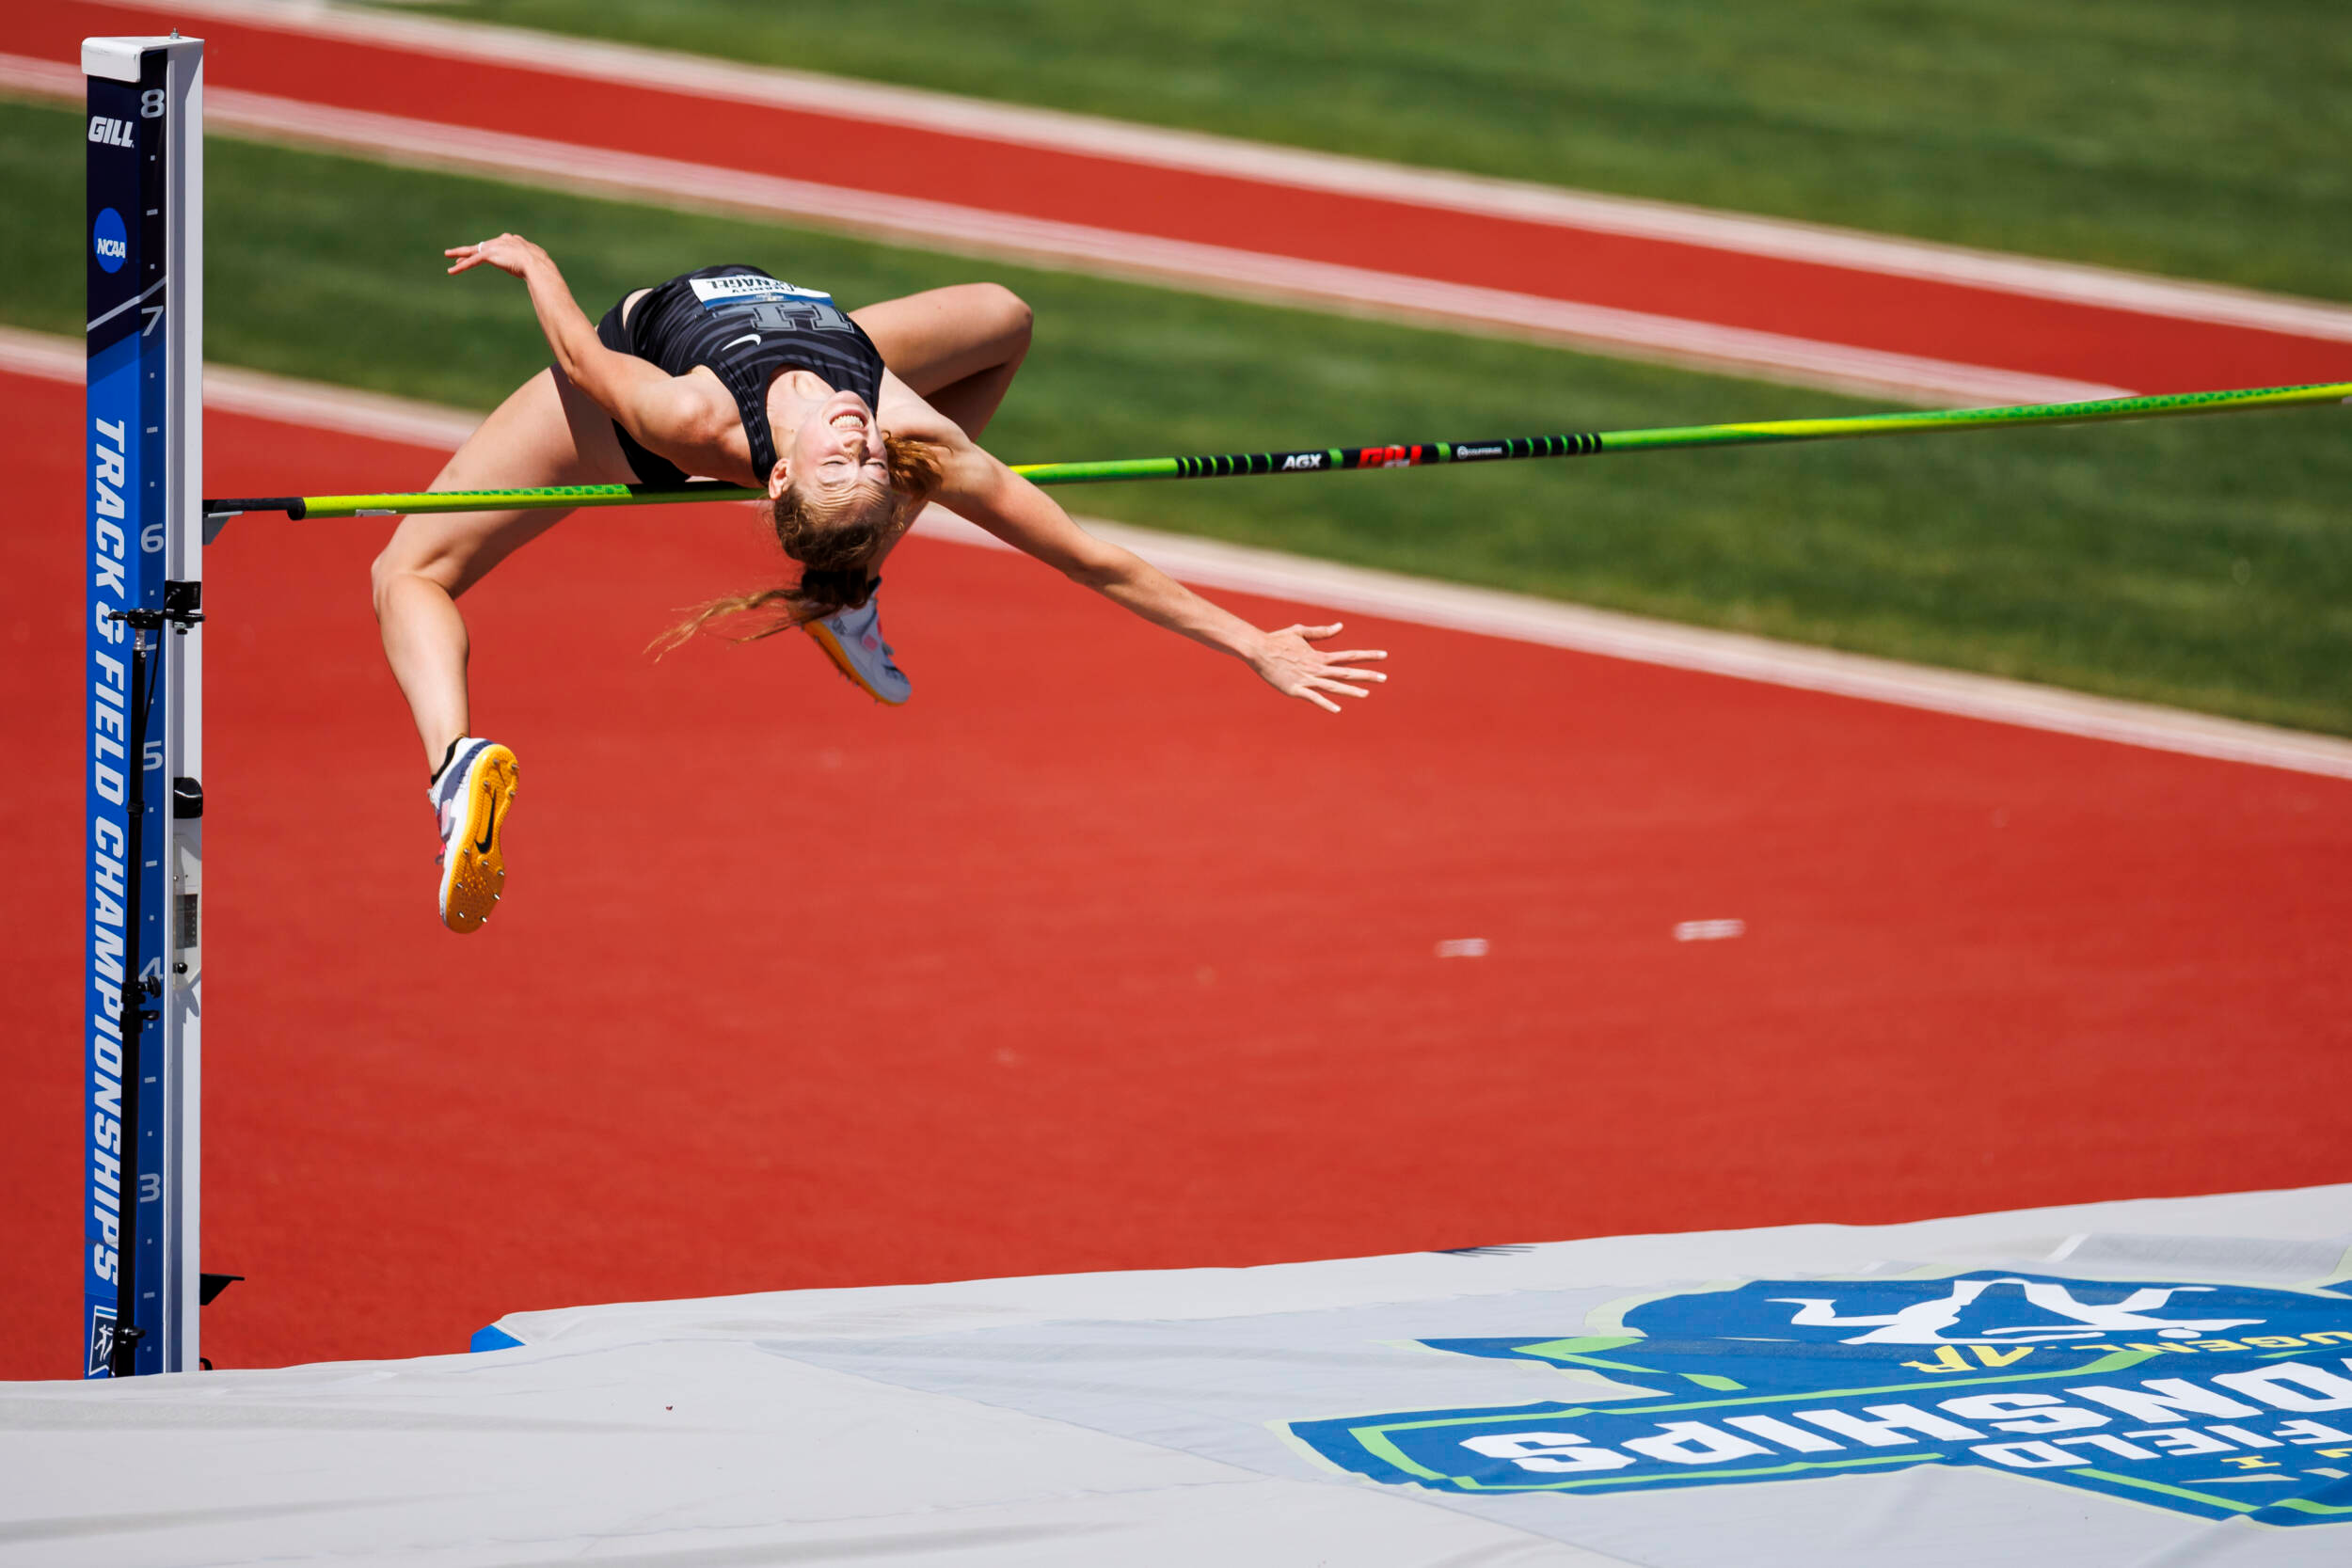 Charity Hufnagel Improves High Jump School Record at NCAA Outdoor Championships